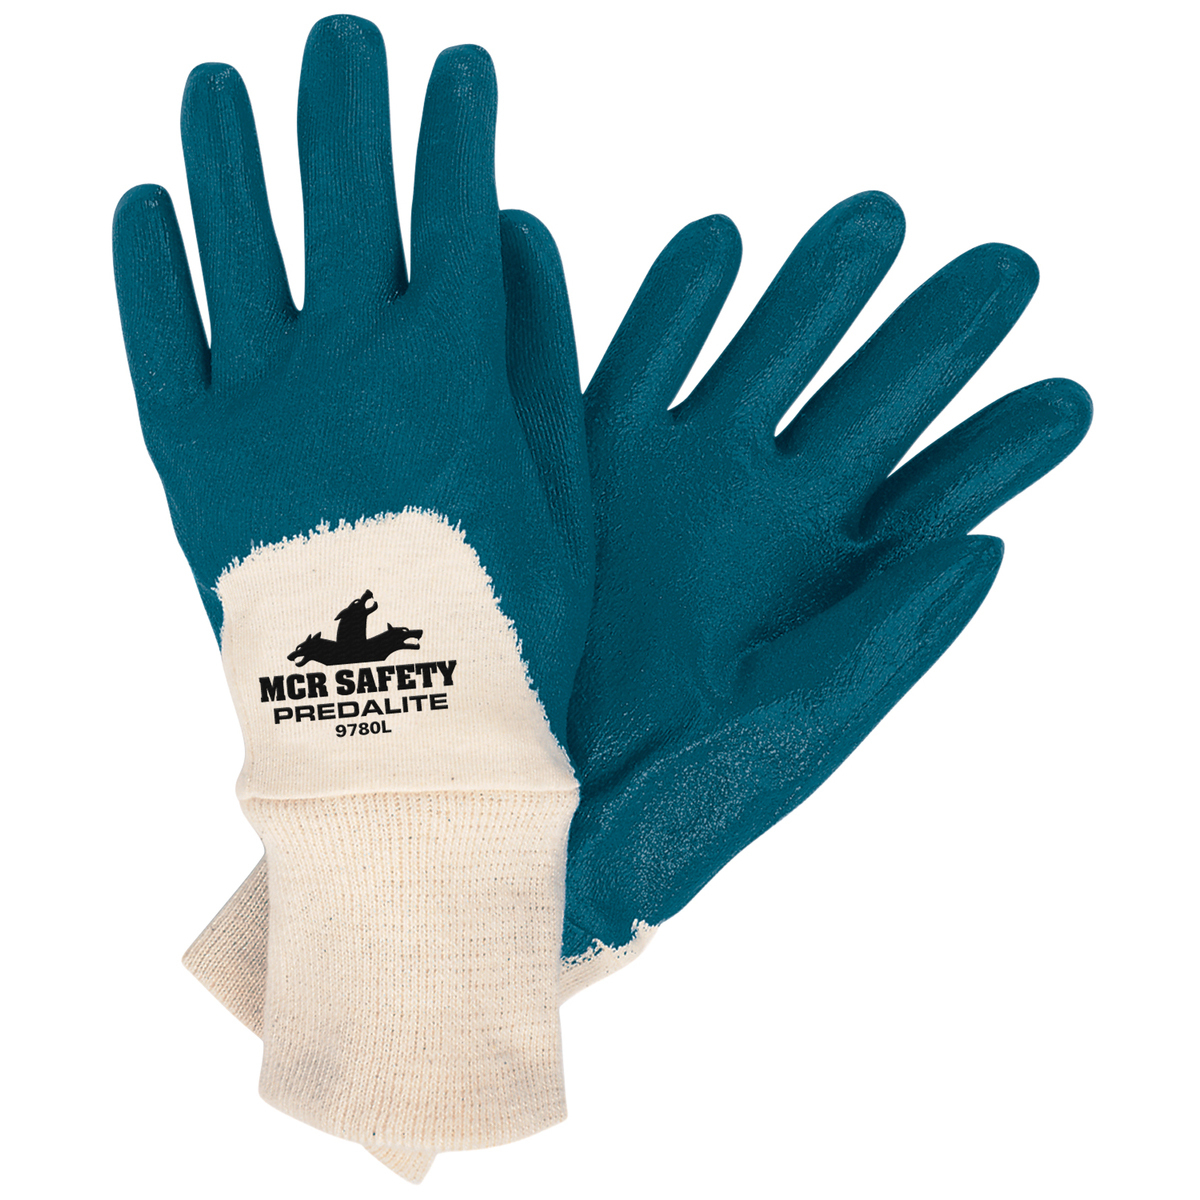 MCR Safety® Small Predalite® Blue Light Nitrile Three-Quarter Coating Work Gloves With Natural Interlock Liner And Knit Wrist